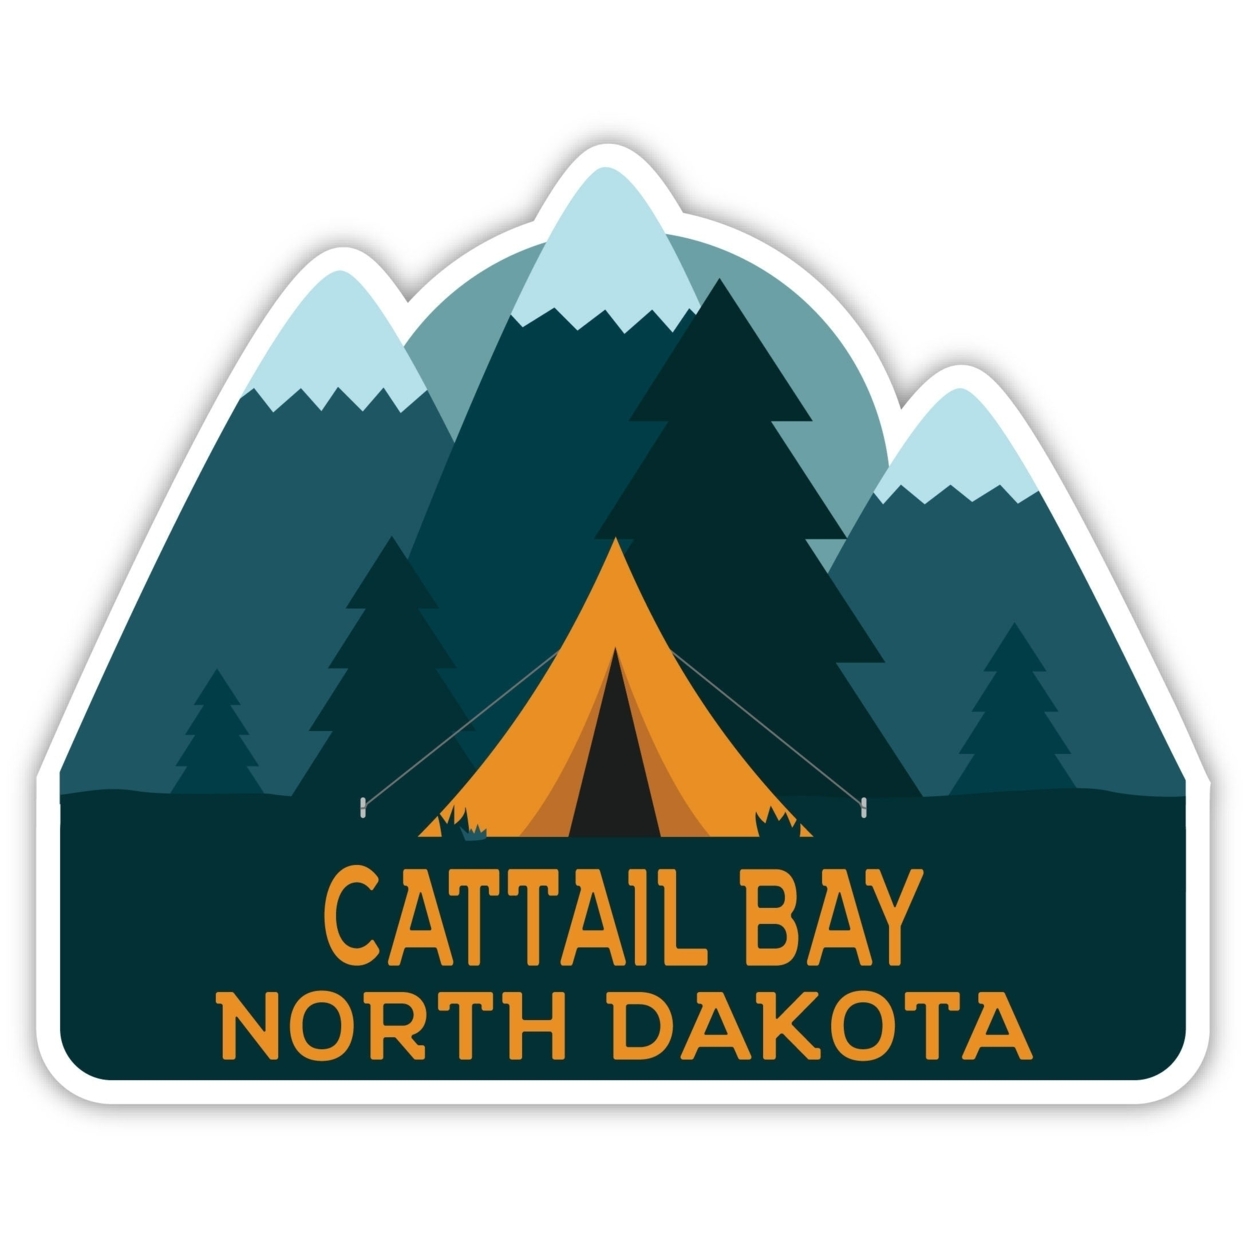 Cattail Bay North Dakota Souvenir Decorative Stickers (Choose Theme And Size) - 4-Pack, 10-Inch, Tent